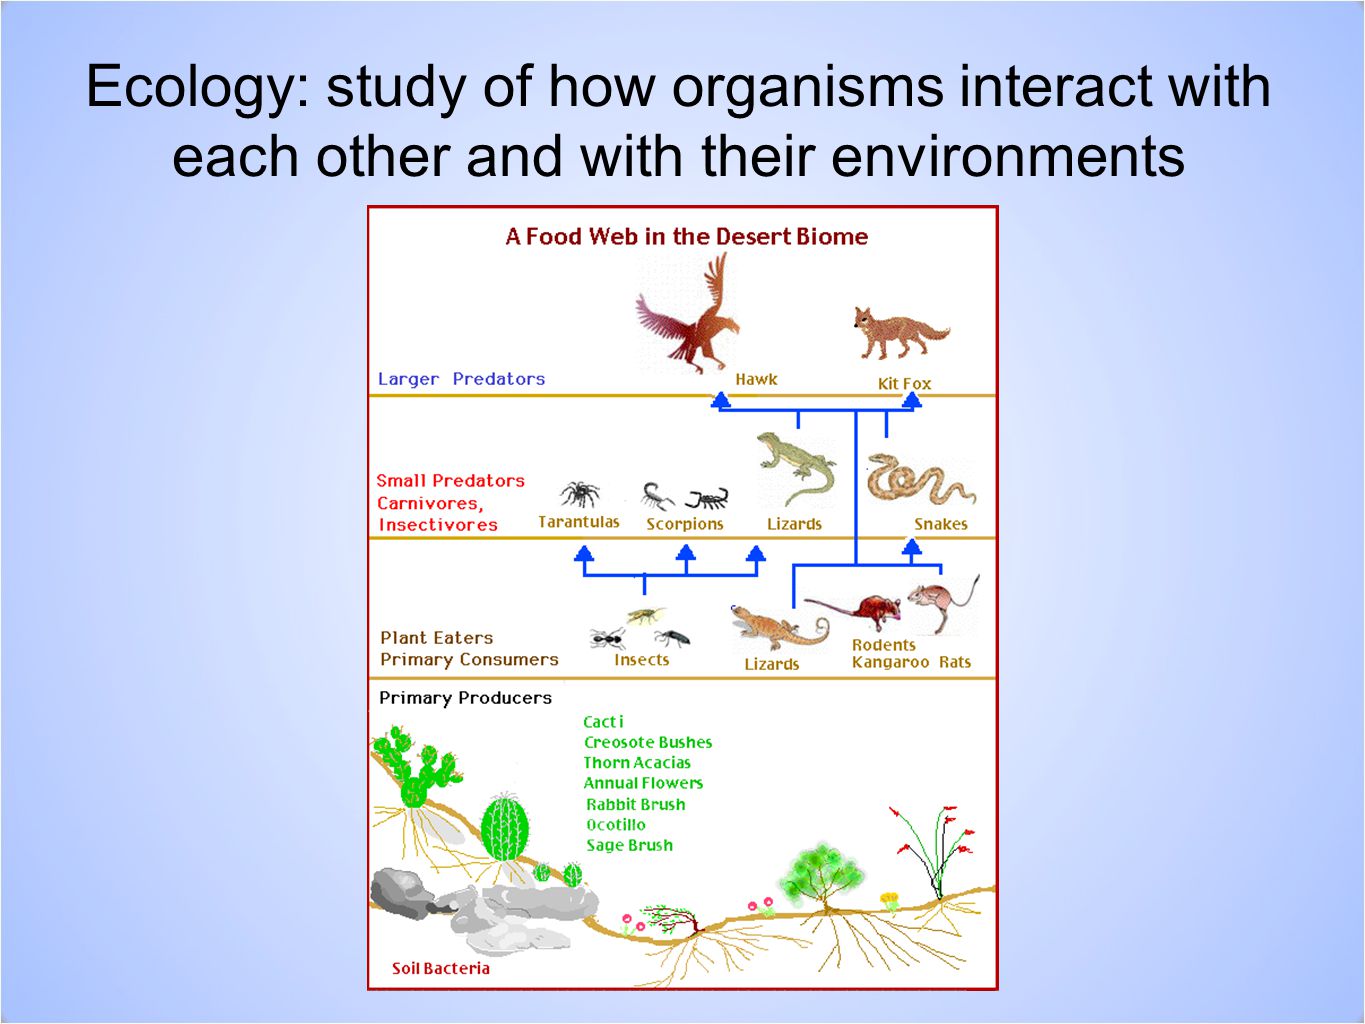 Ecology: study of how organisms interact with each other and with their environments